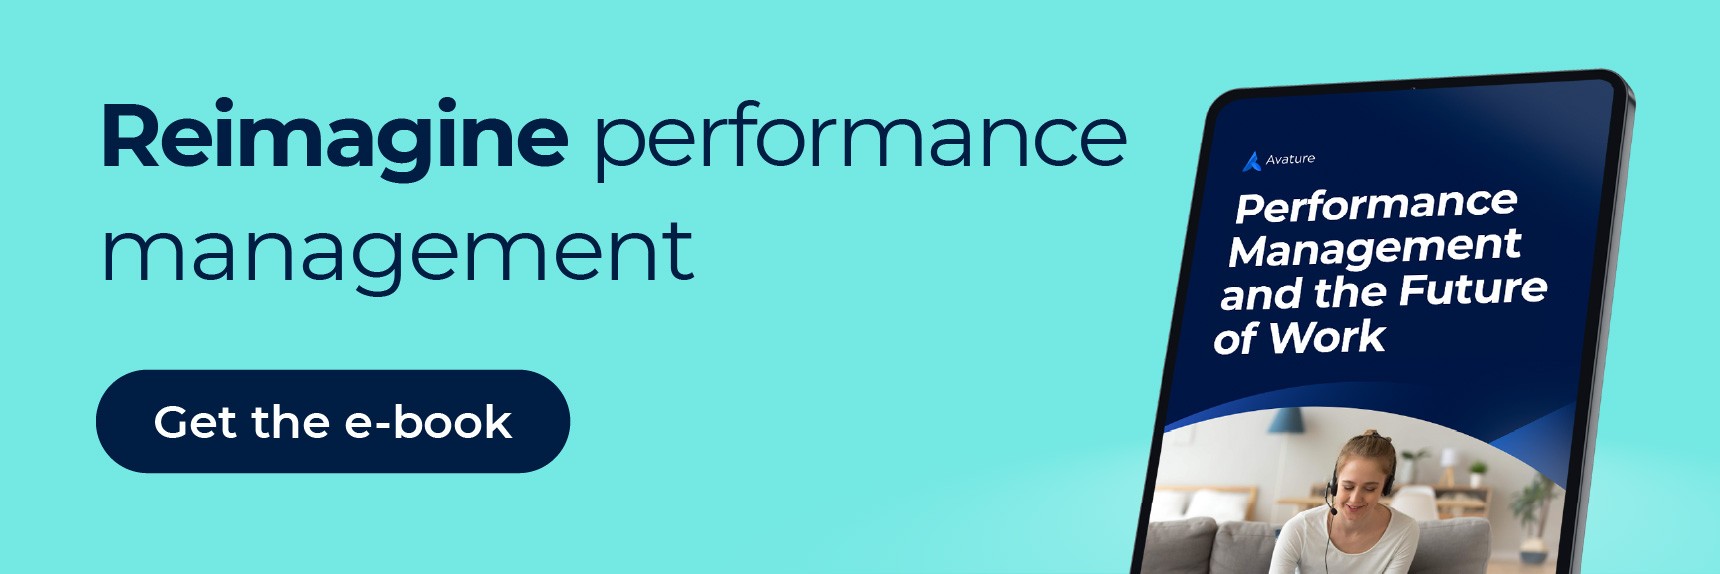 Banner of Avature's e-book on performance management best practices and a link to the landing page to download it.